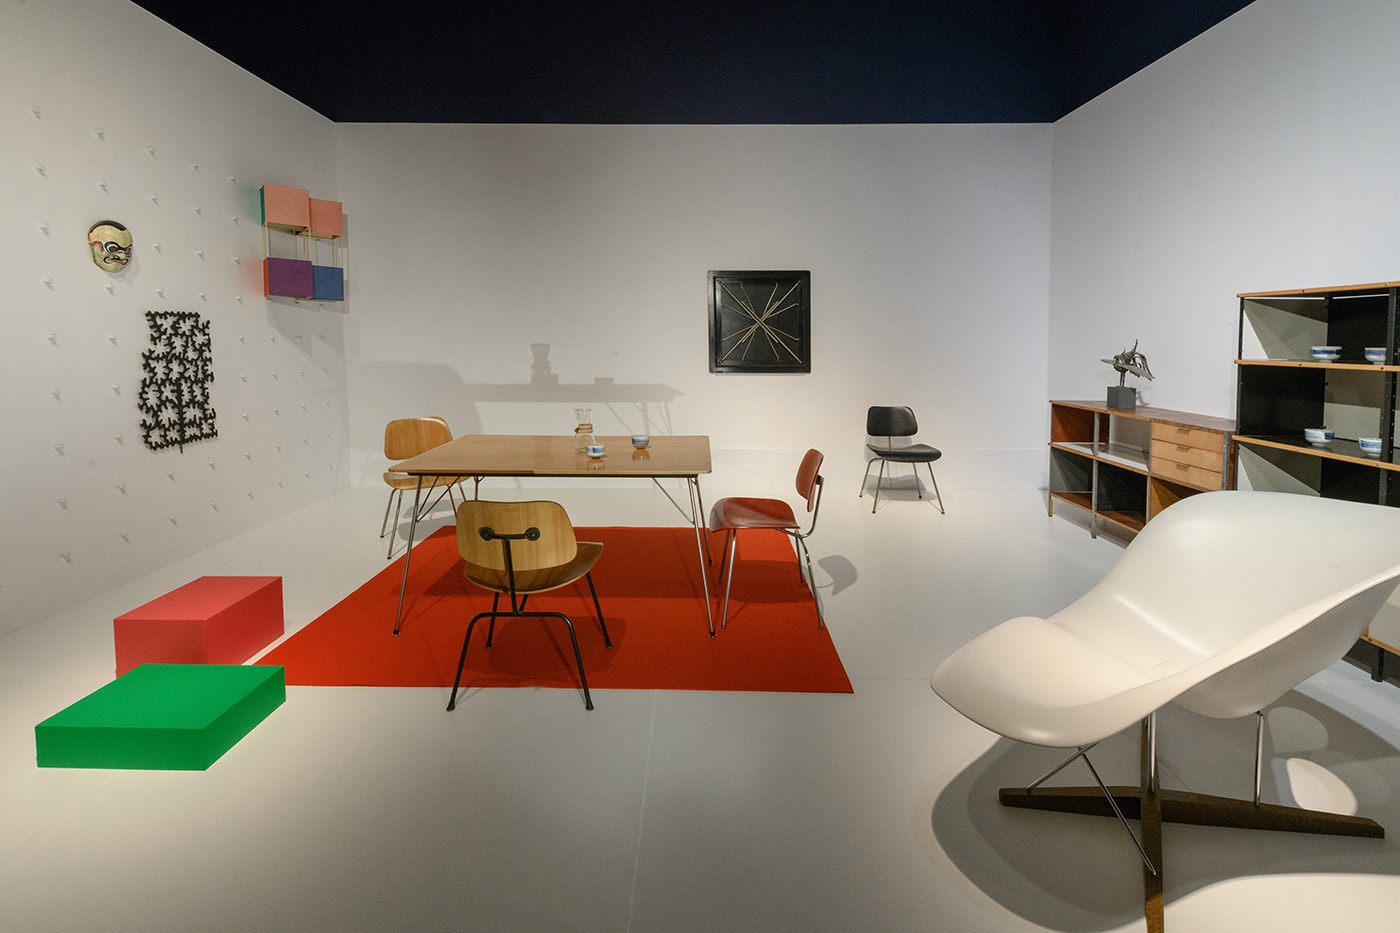 charles ray eames henry ford museum of american innovation design furniture